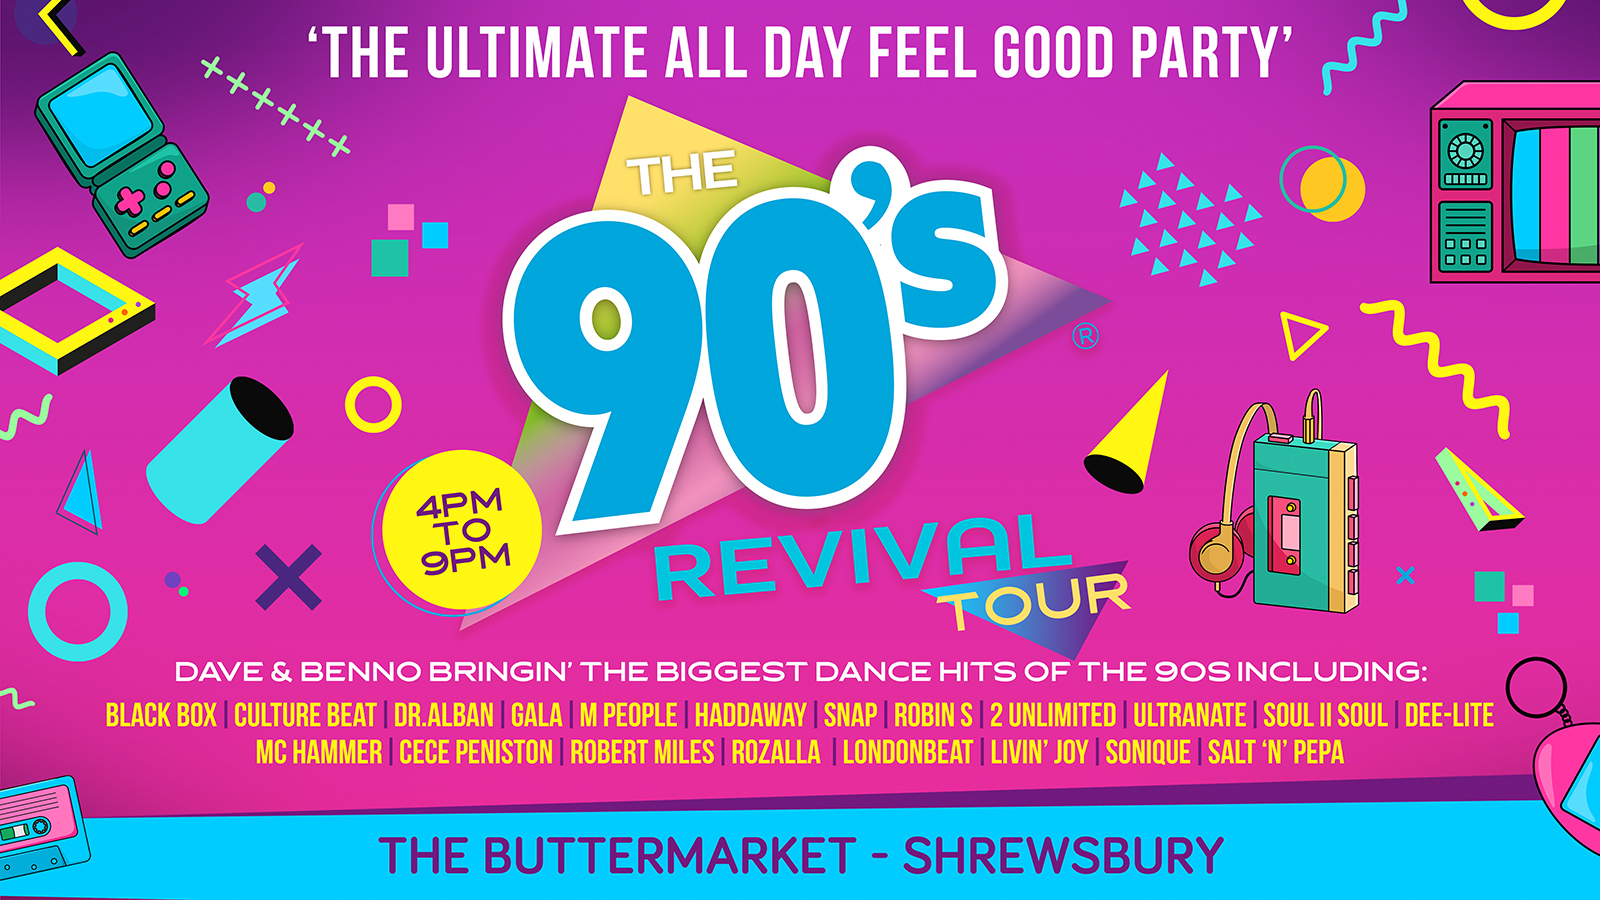 The BIG 90s REVIVAL Tour – THE ULTIMATE ALL DAY FEEL GOOD PARTY!